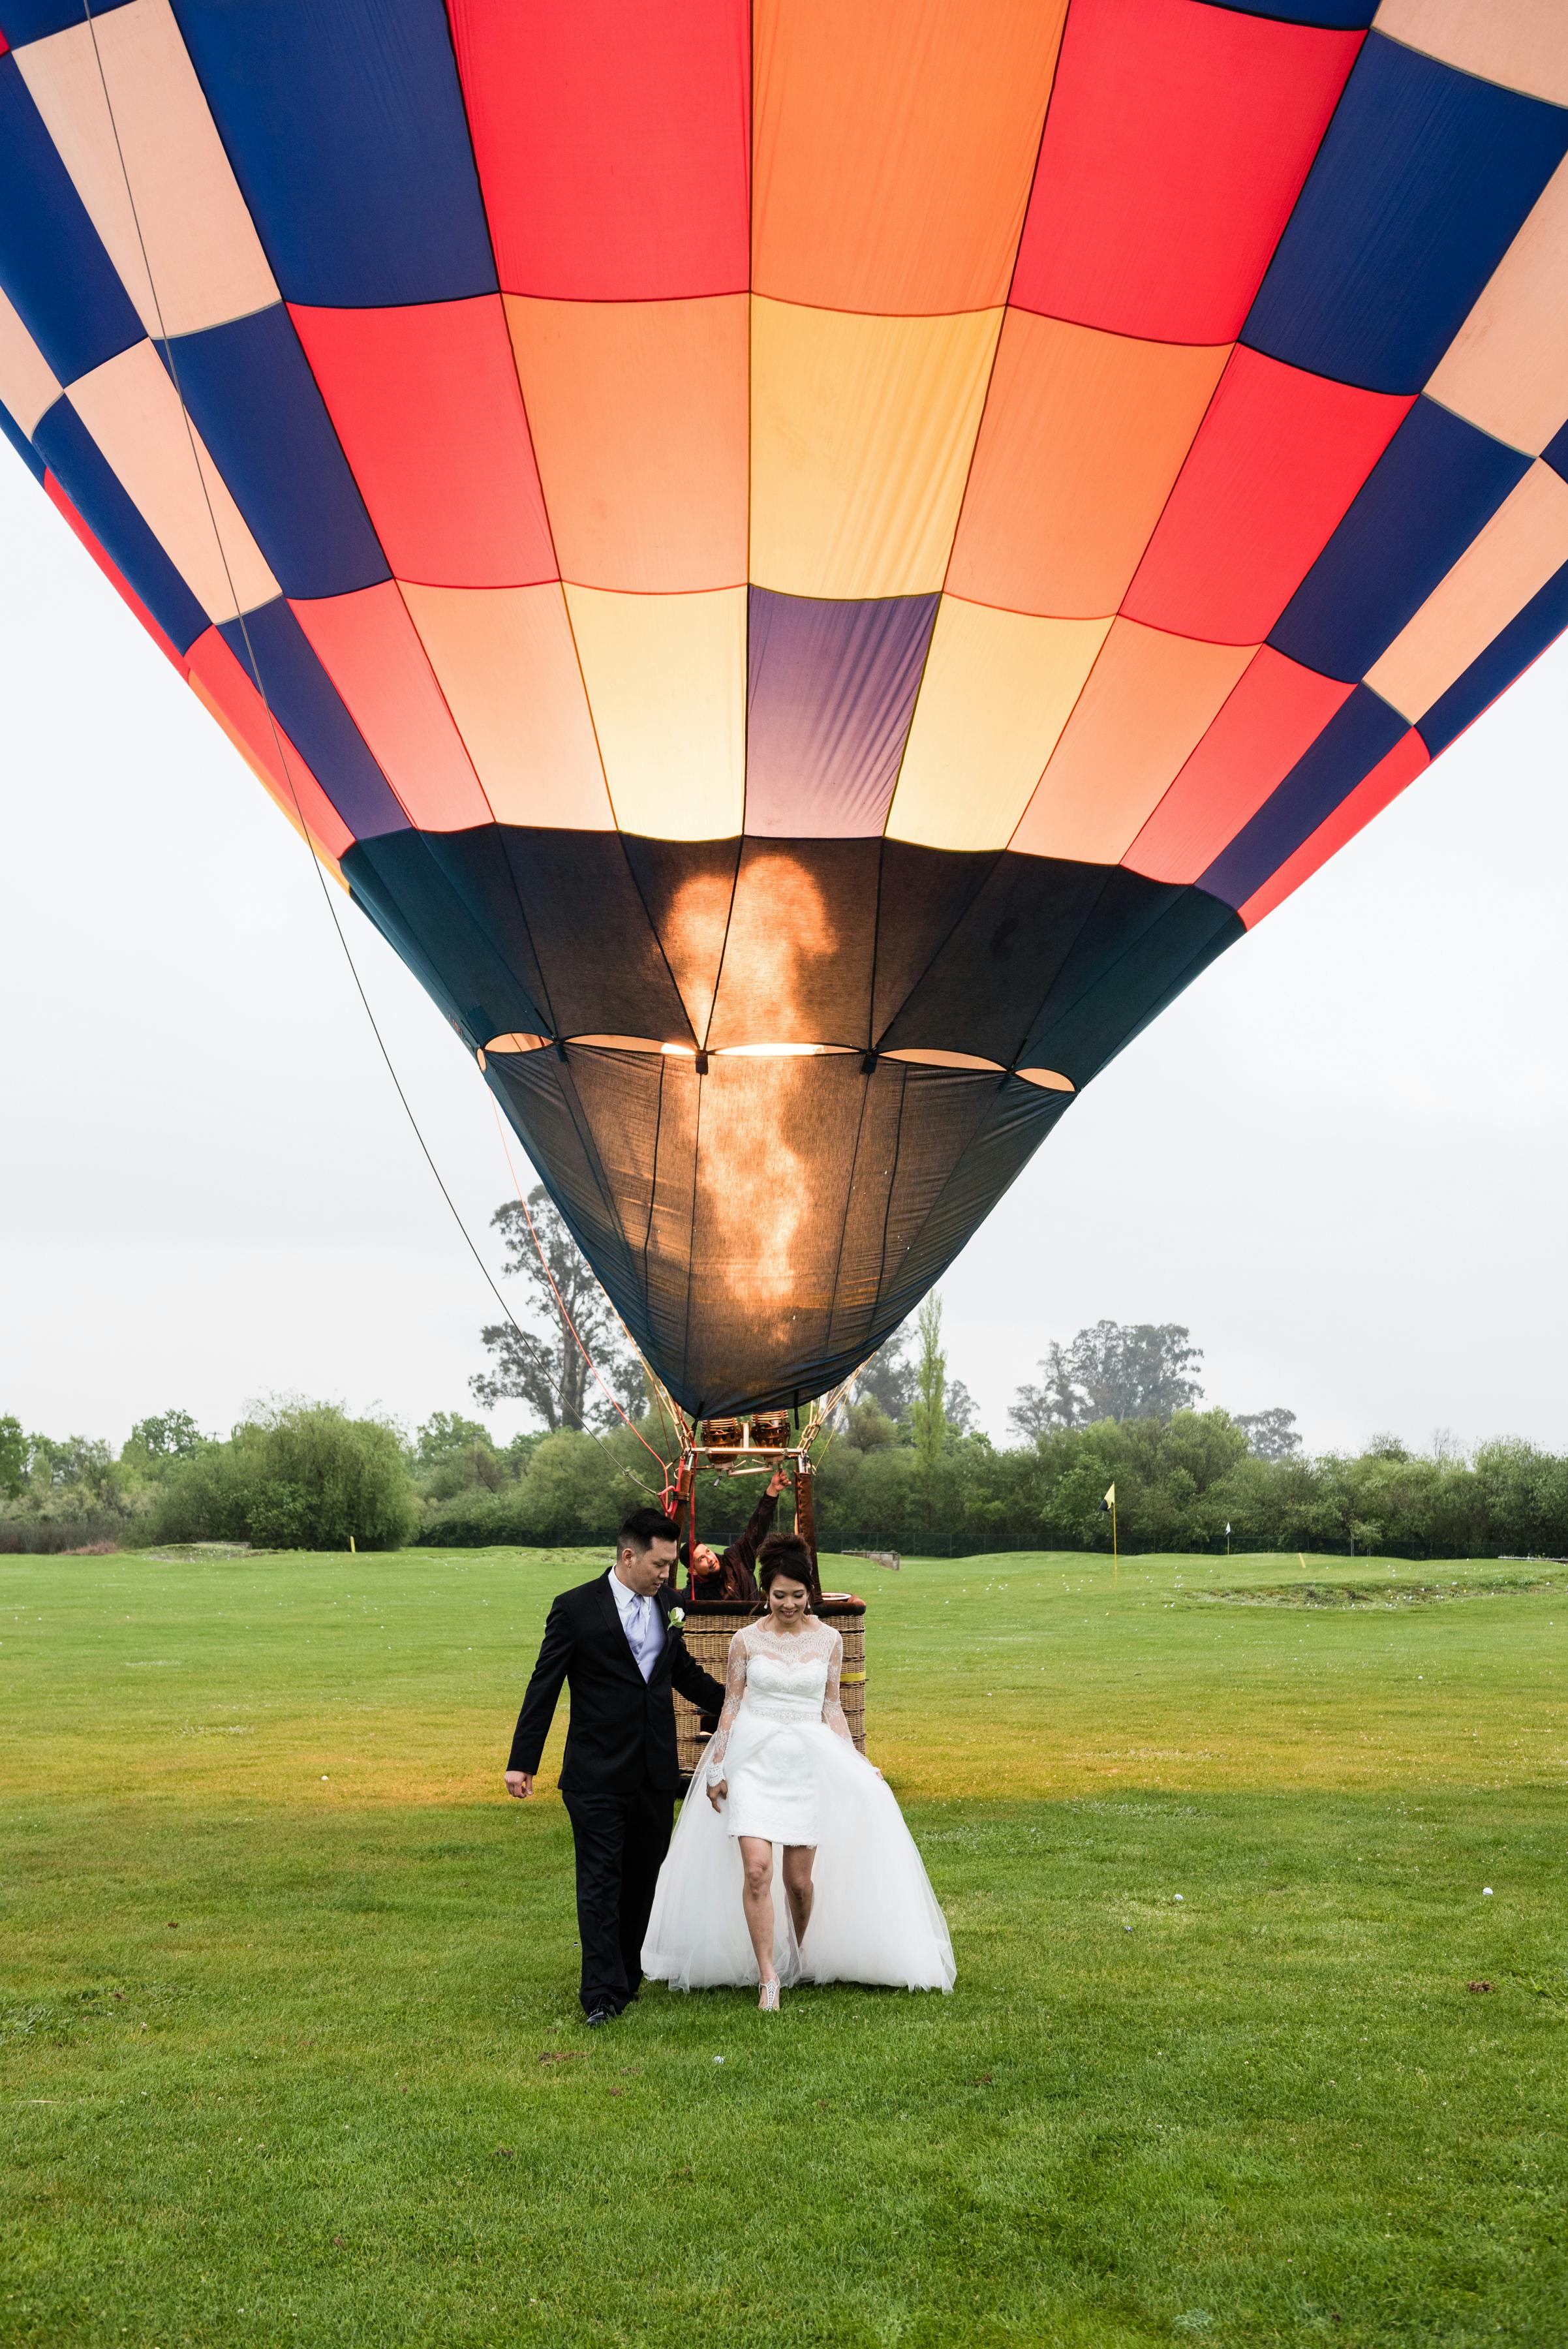 Bride And Groom Stand For Photo-Op Near Hot Air Ballon At Vineyard Wedding in Napa Valley, California | PartySlate